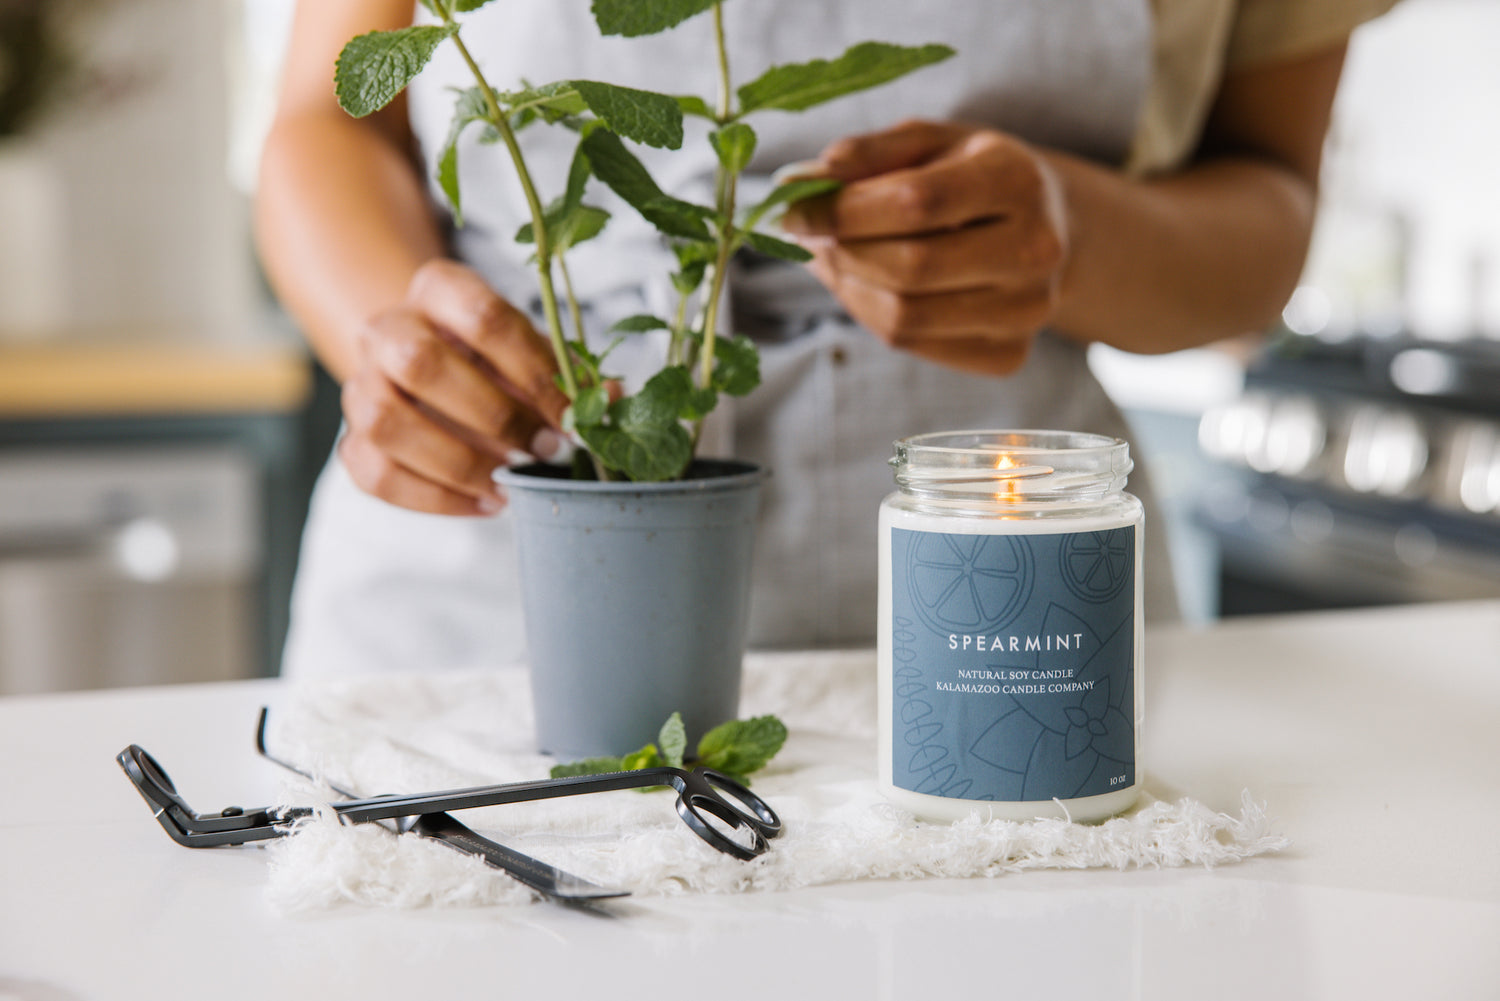 A Spearmint candle next to a plant of spearmint